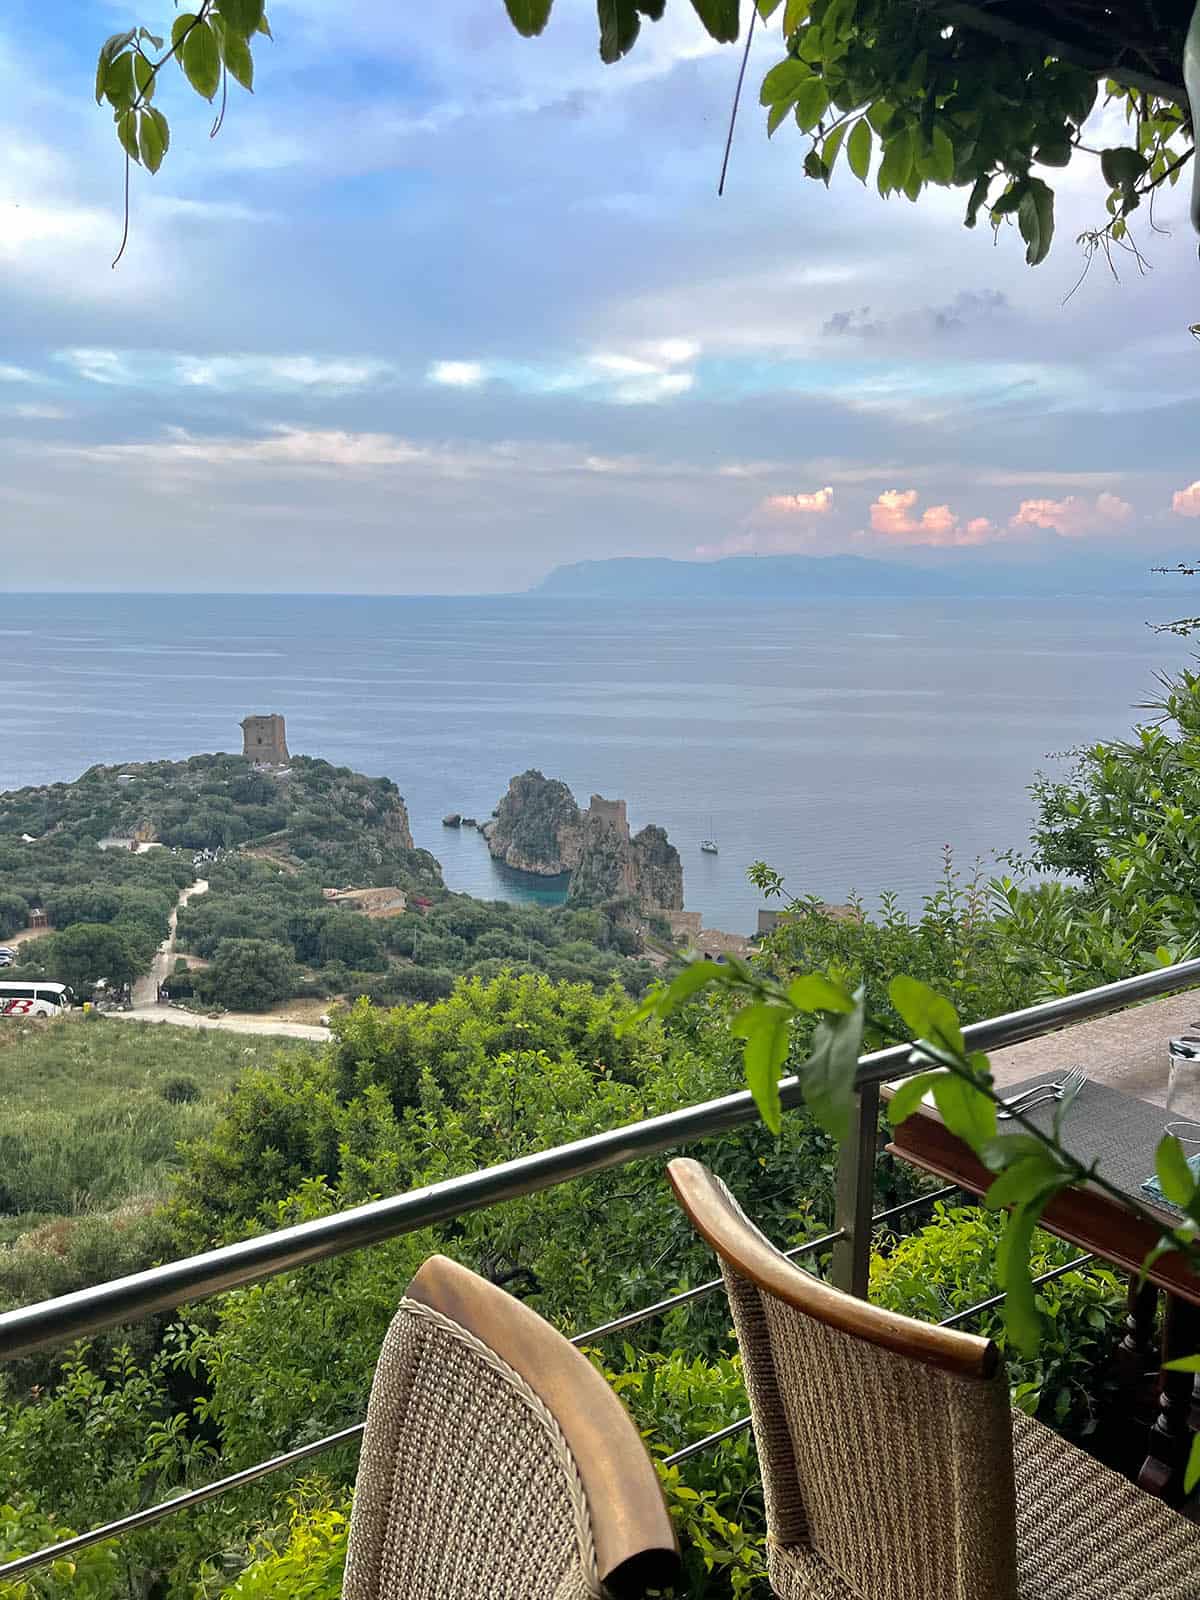 An image of the view of Scopello and Tonnara Di Scopello from Hotel Bennistra Ristorante. The blue ocean and lush green landscape sit in the background while the restaurant tables sit perched up the hill in the foreground.